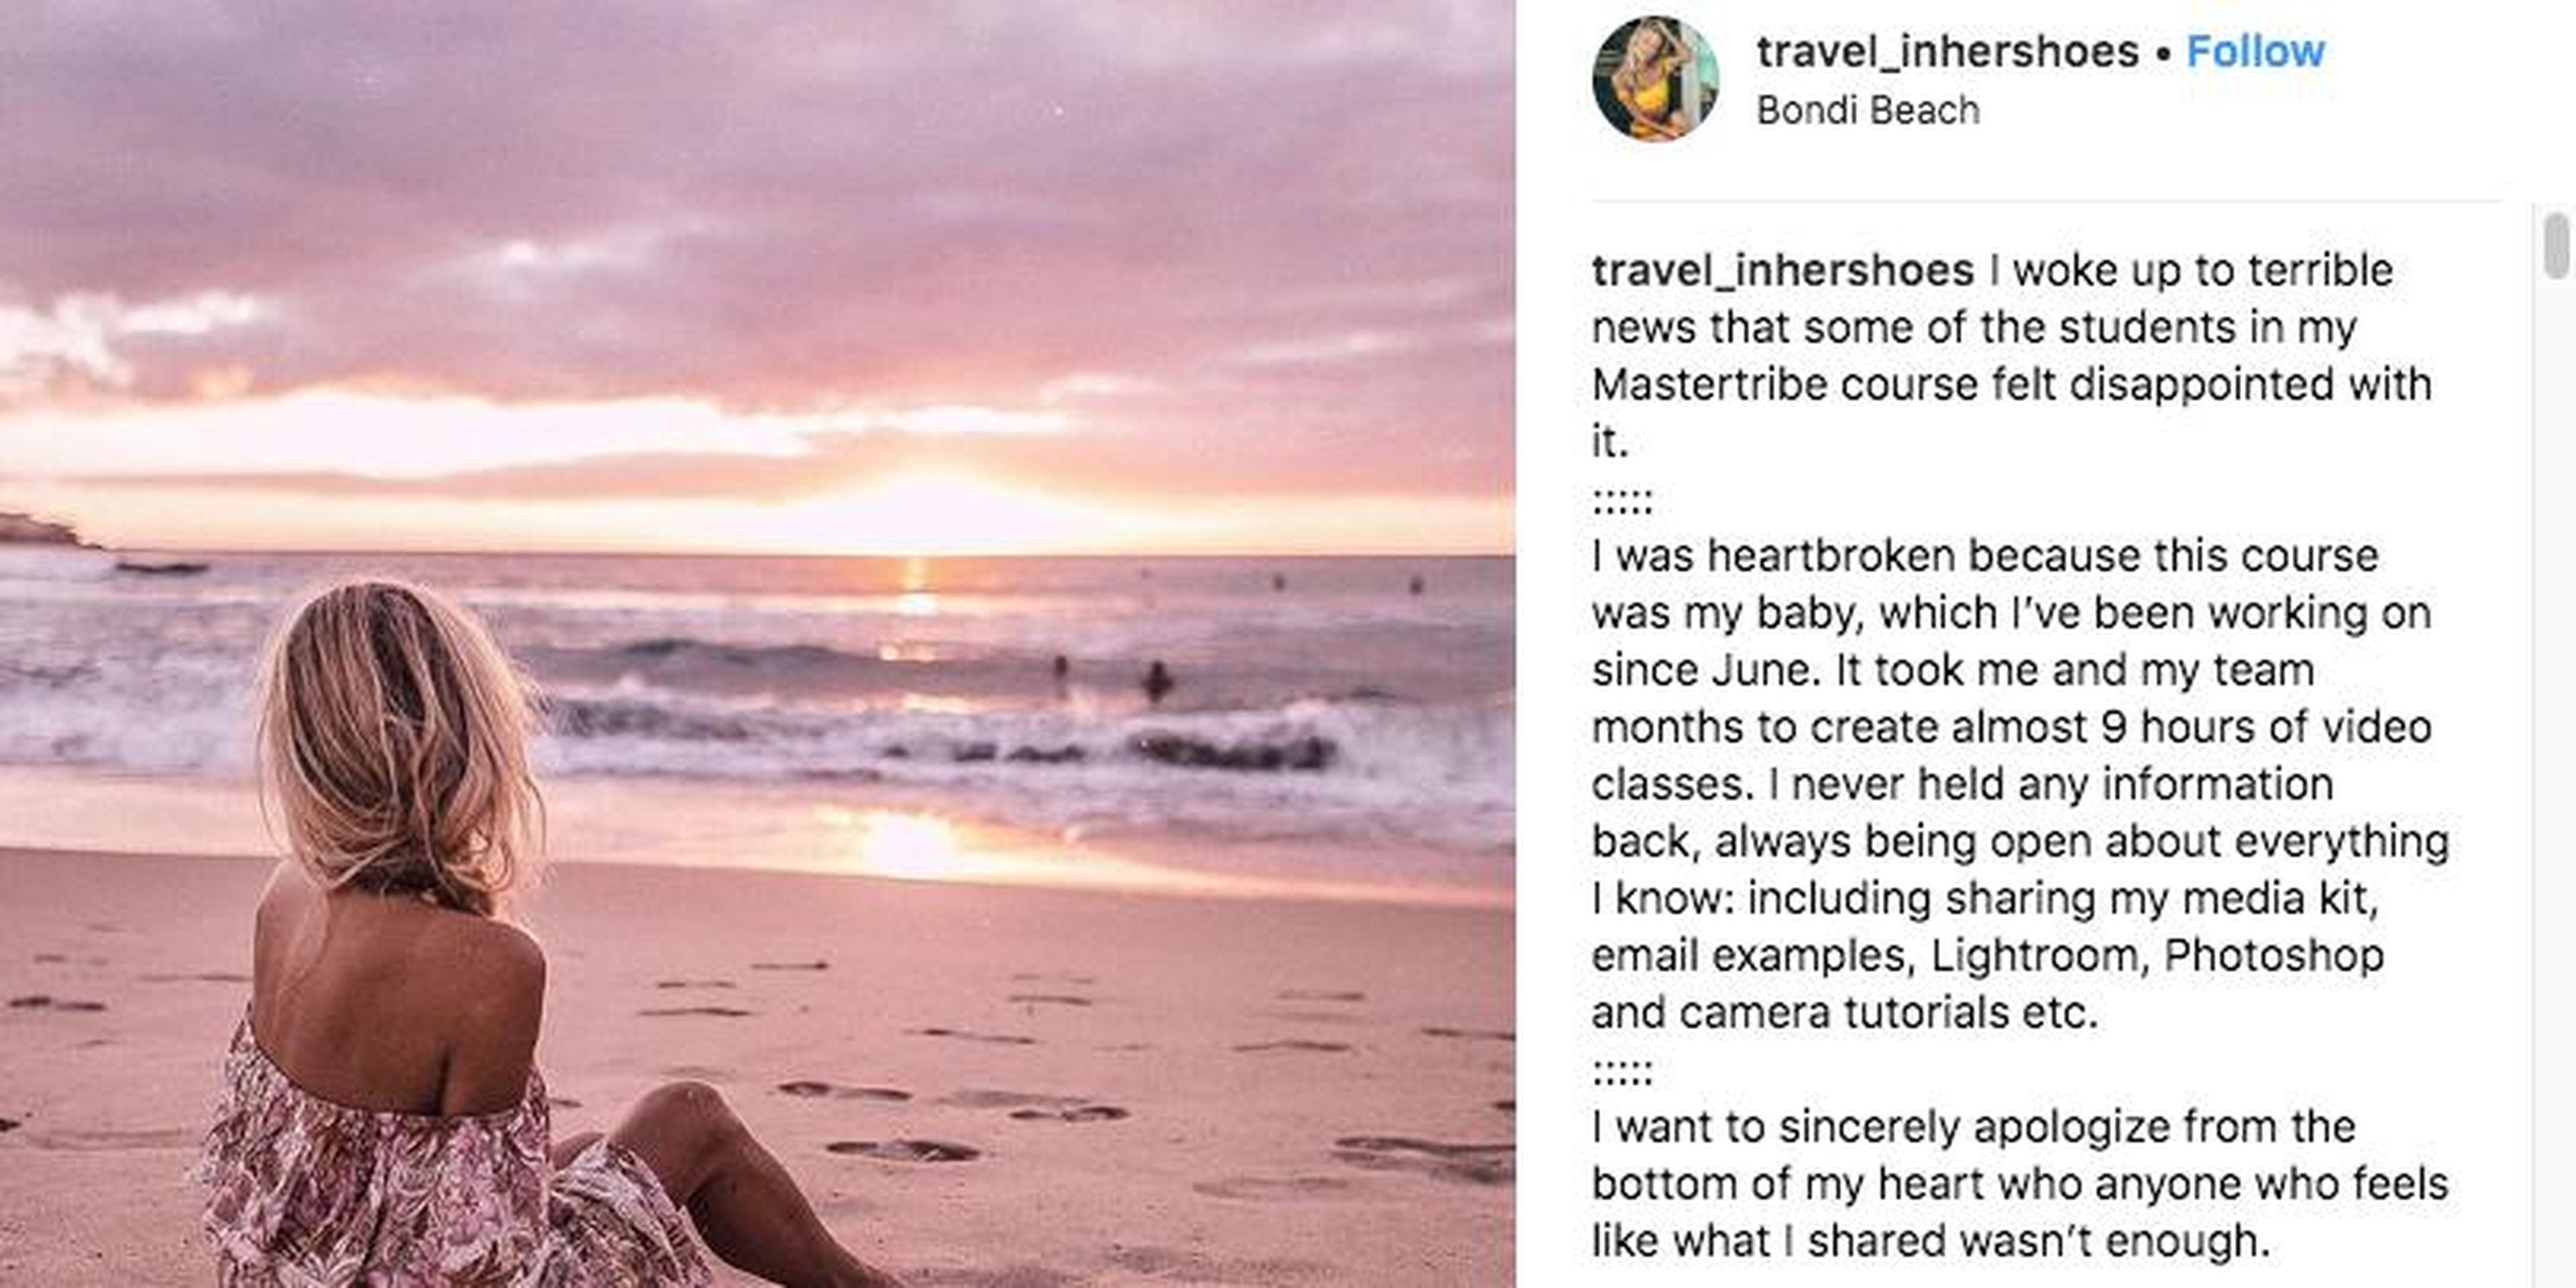 Aggie Lal, who’s instagram @travel_inhershoes, apologized to her followers